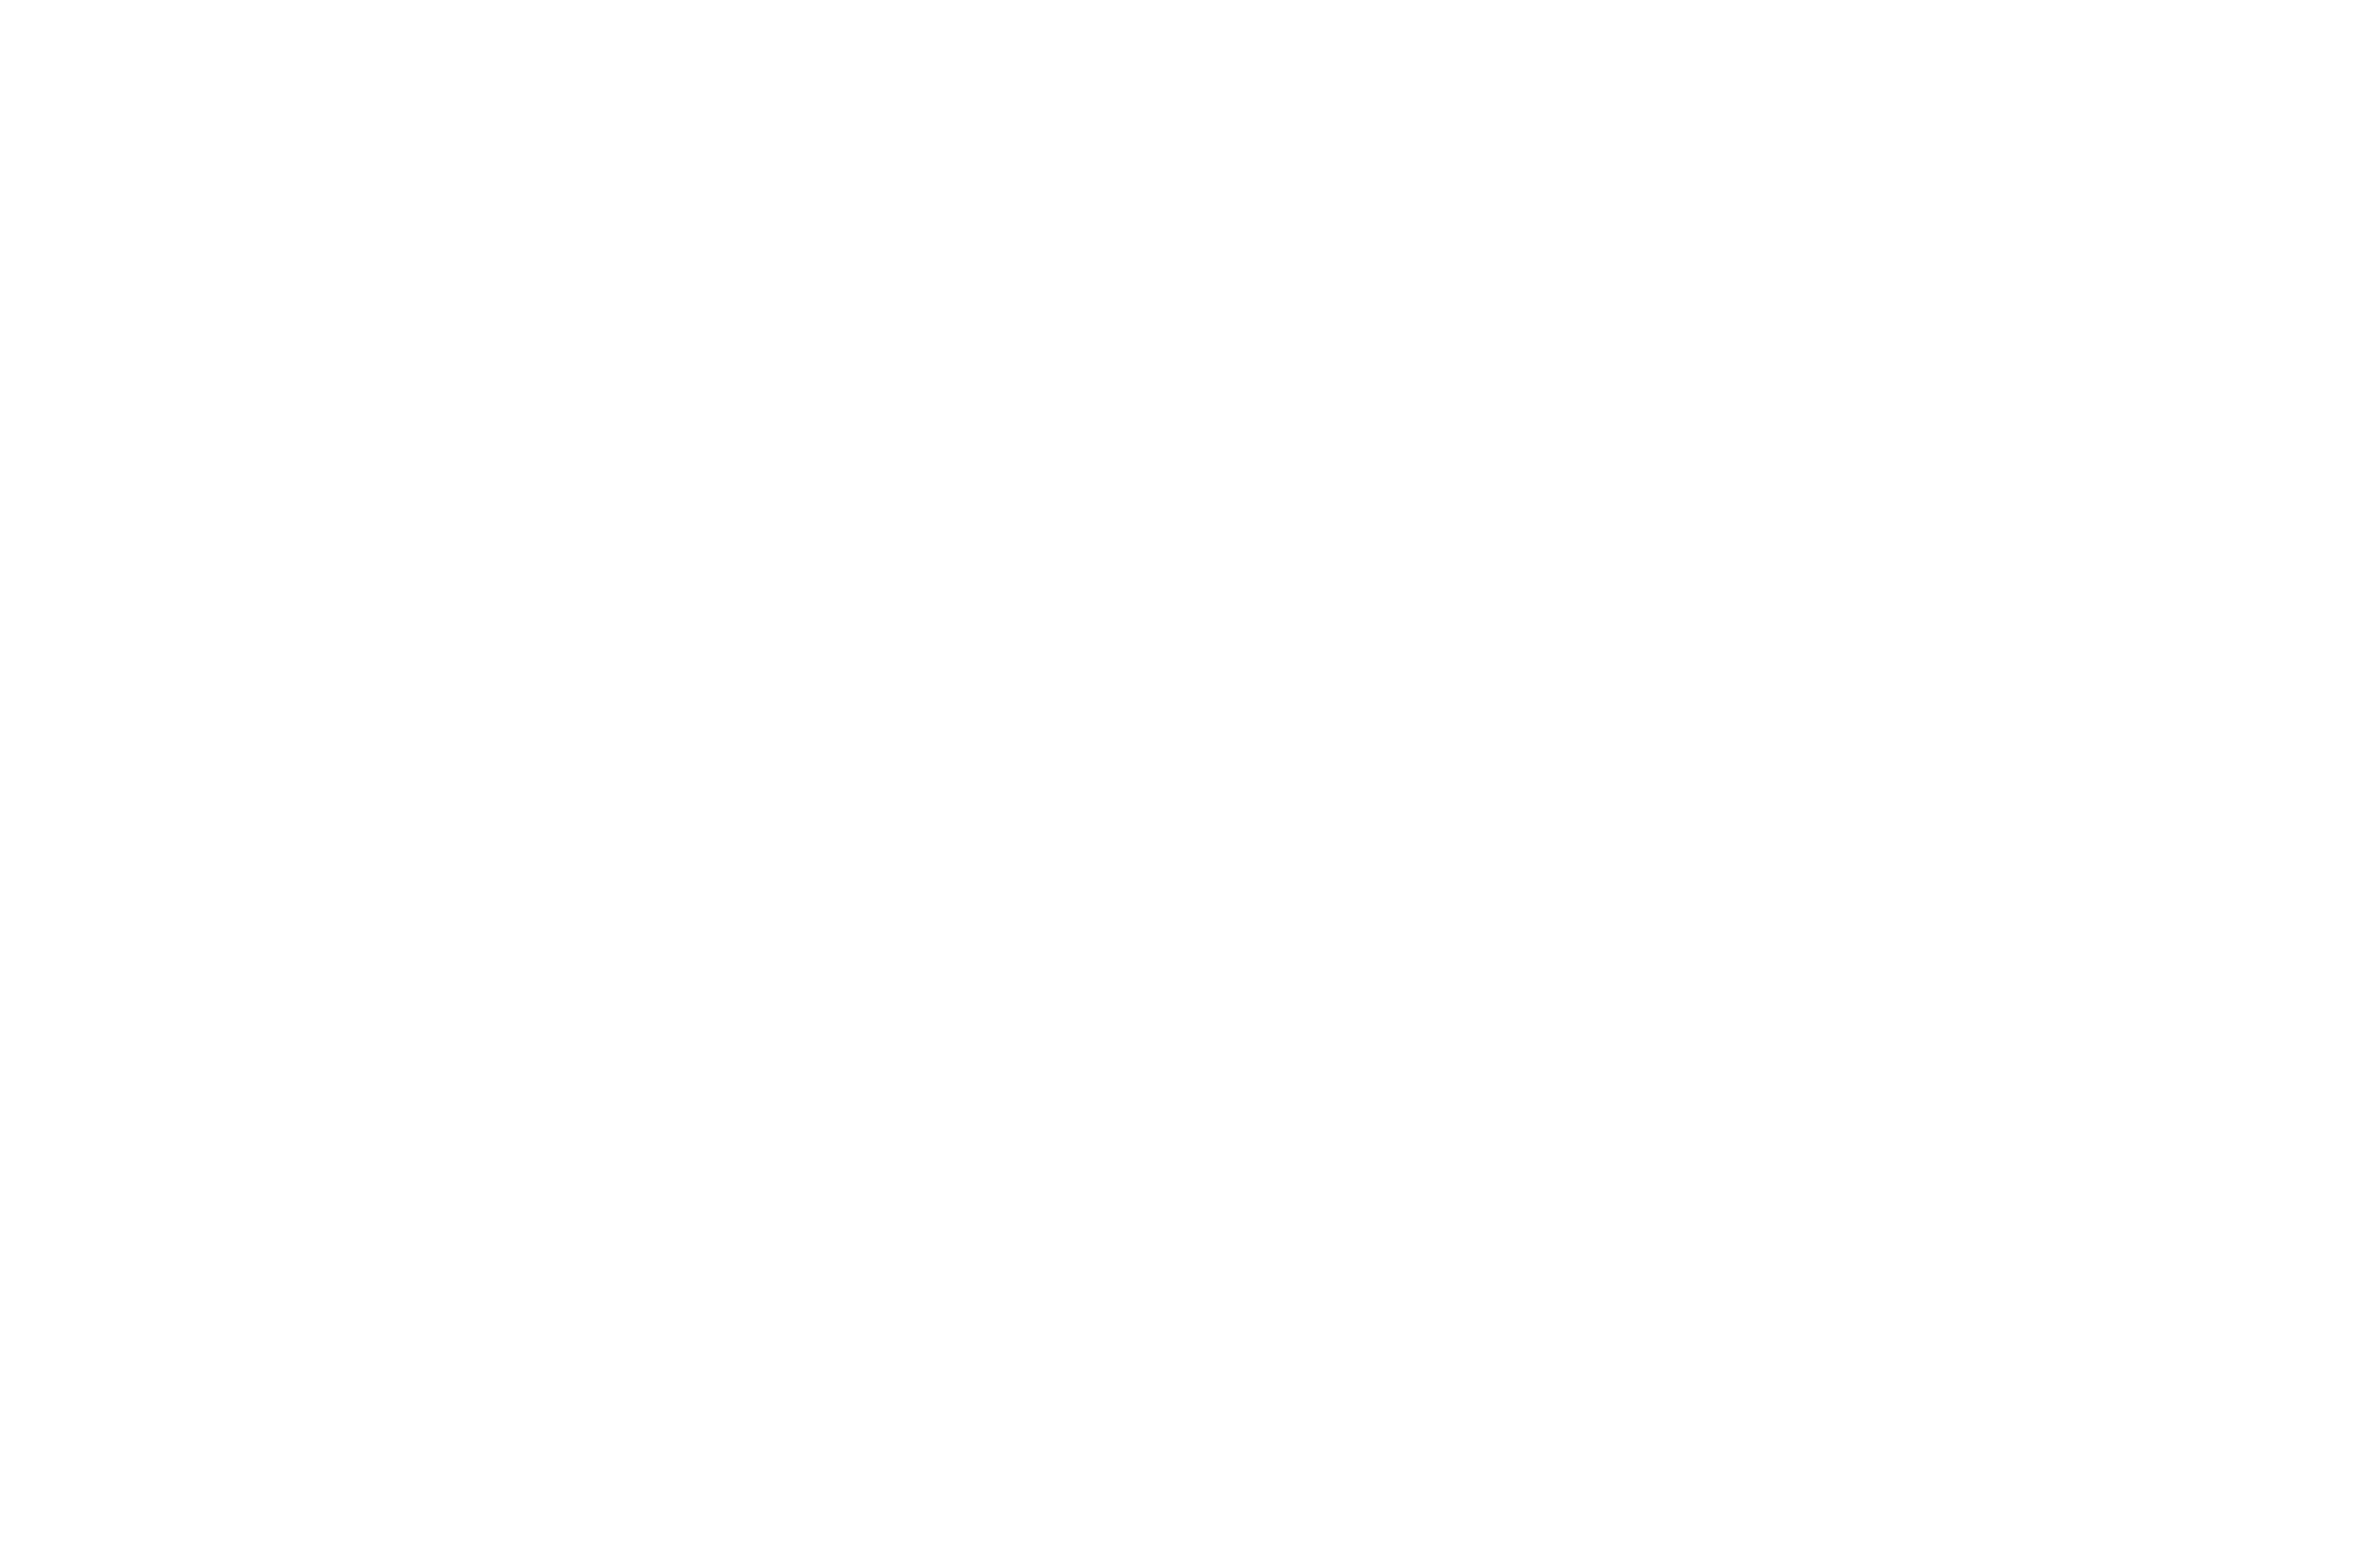 zoegas_solution_text_logo.png